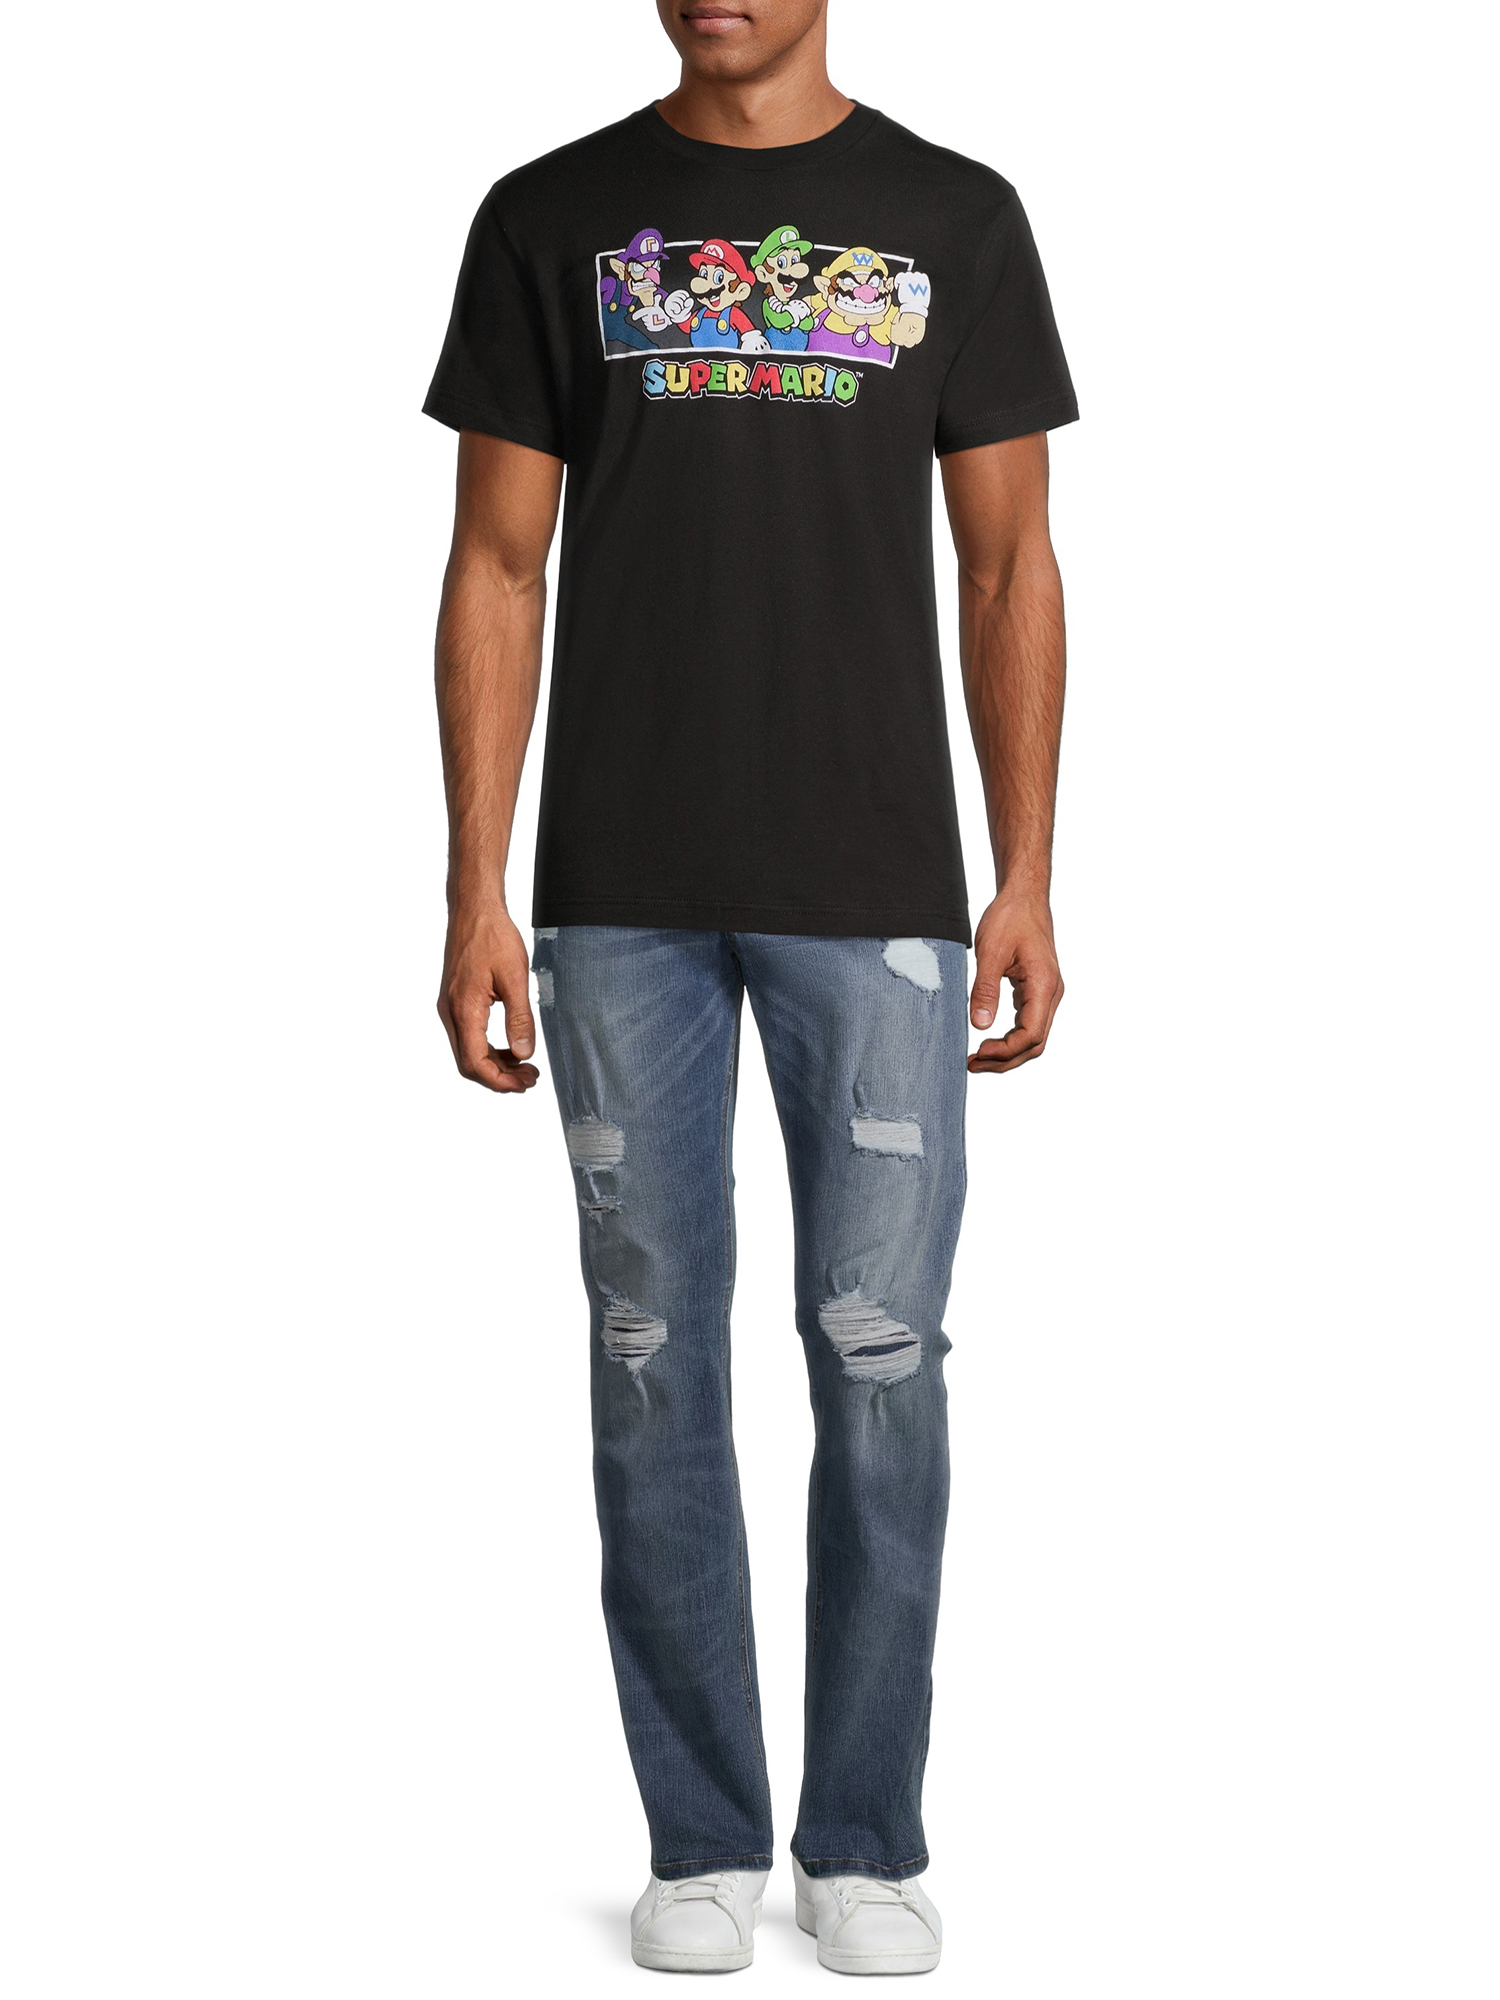 Nintendo Super Mario Crew & Made In The 80's Men's and Big Men's Graphic T-Shirts, 2-Pack - image 3 of 11